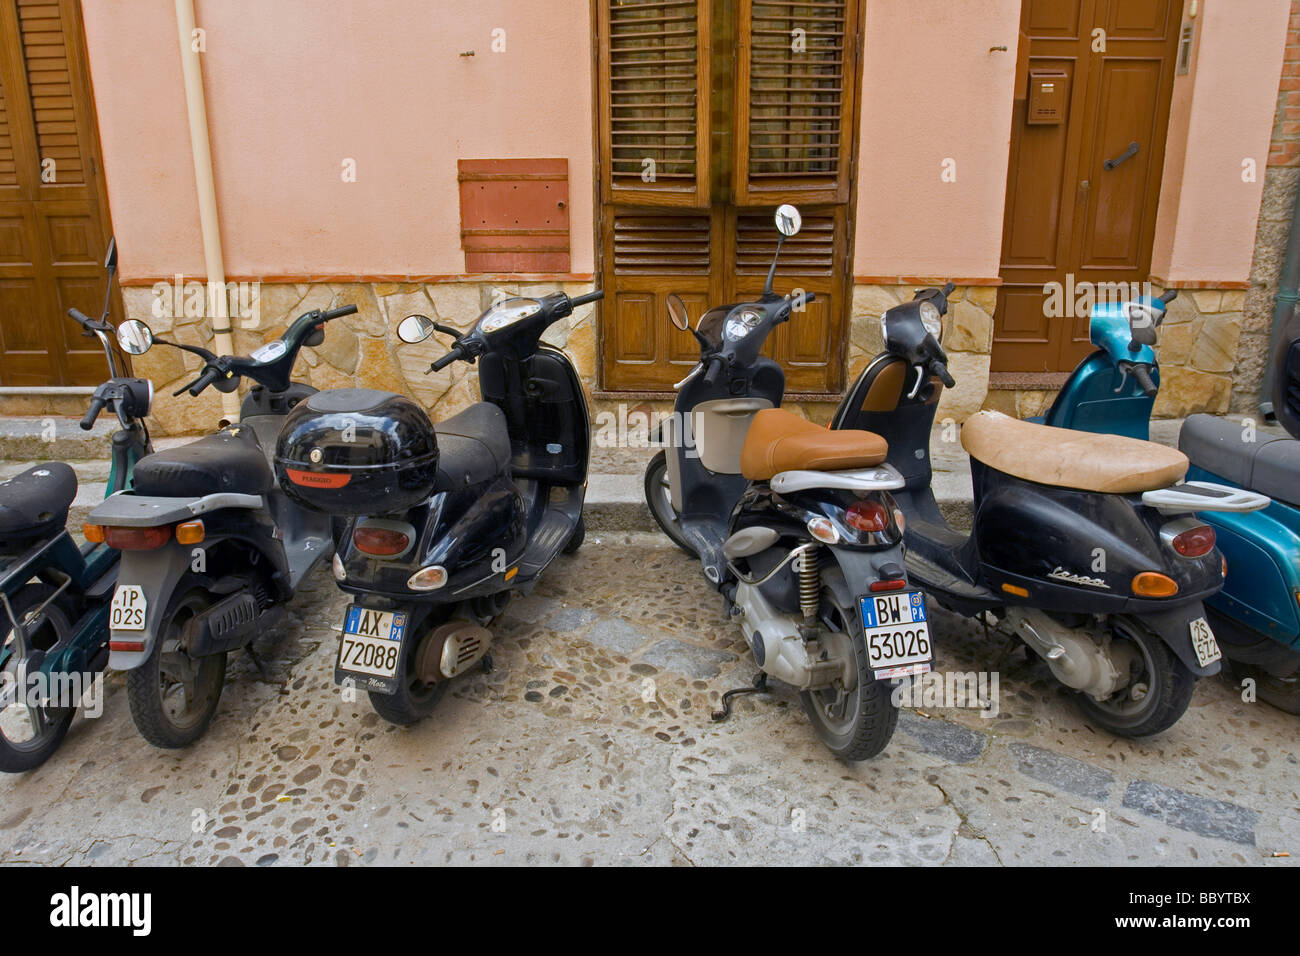 Motorbikes or scooters, Cefalu, Province of Palermo, Sicily, Italy Stock Photo